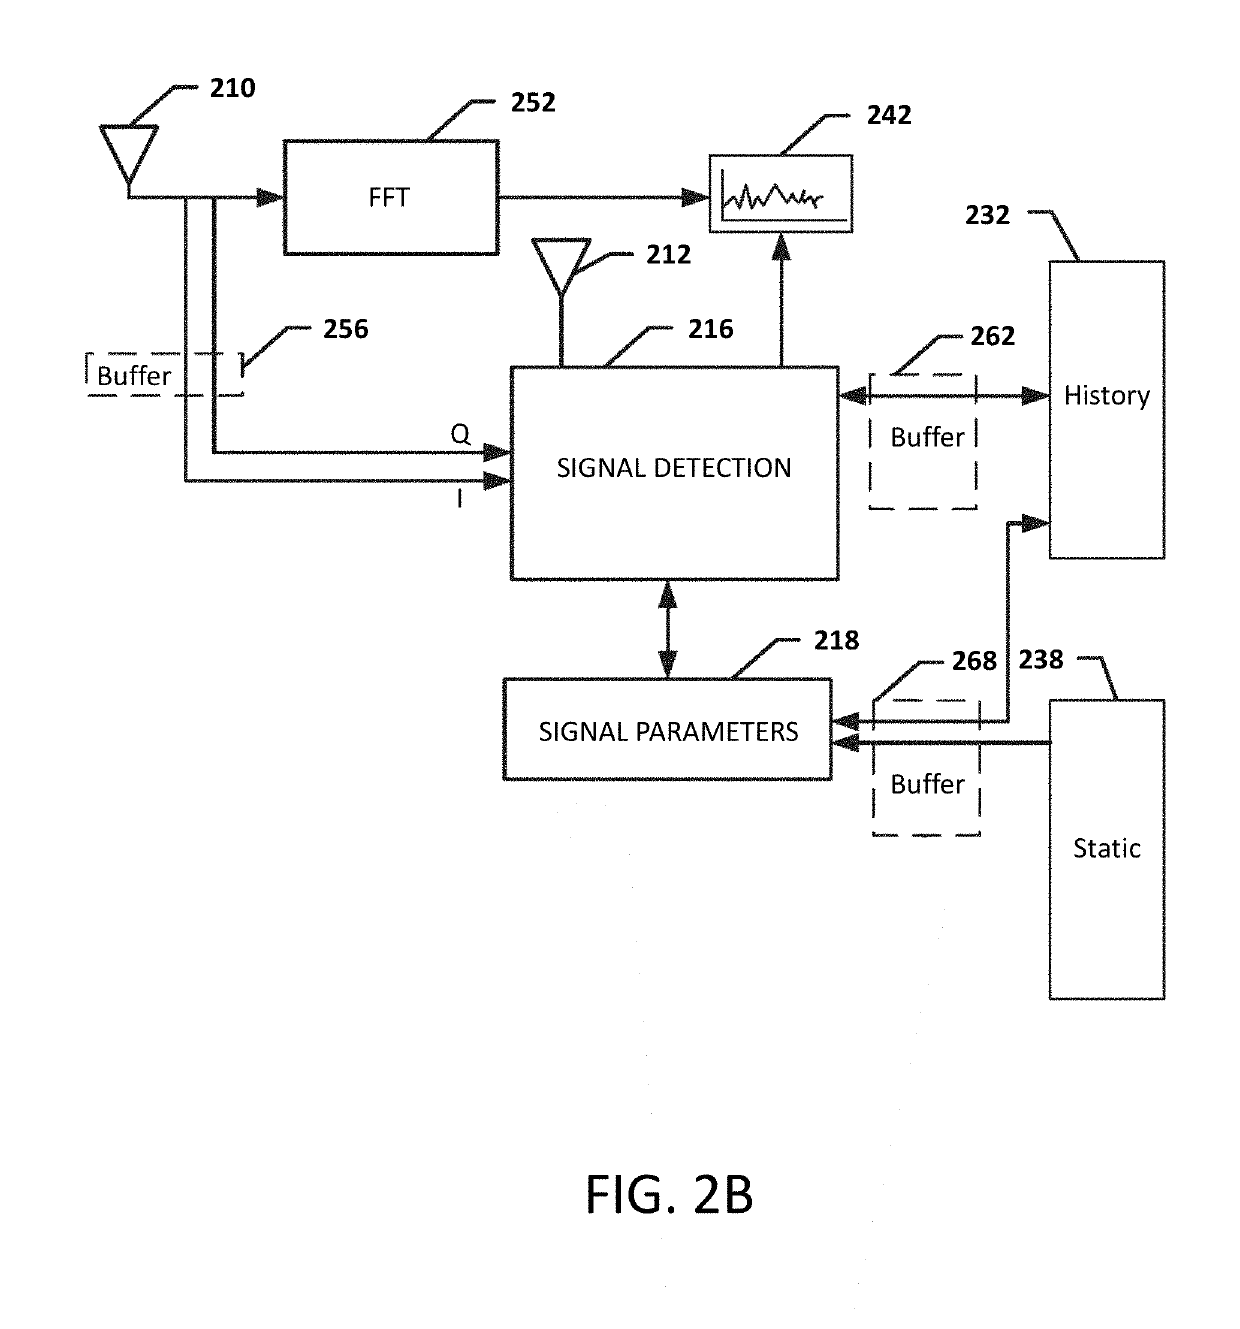 Systems, methods, and devices for unmanned vehicle detection